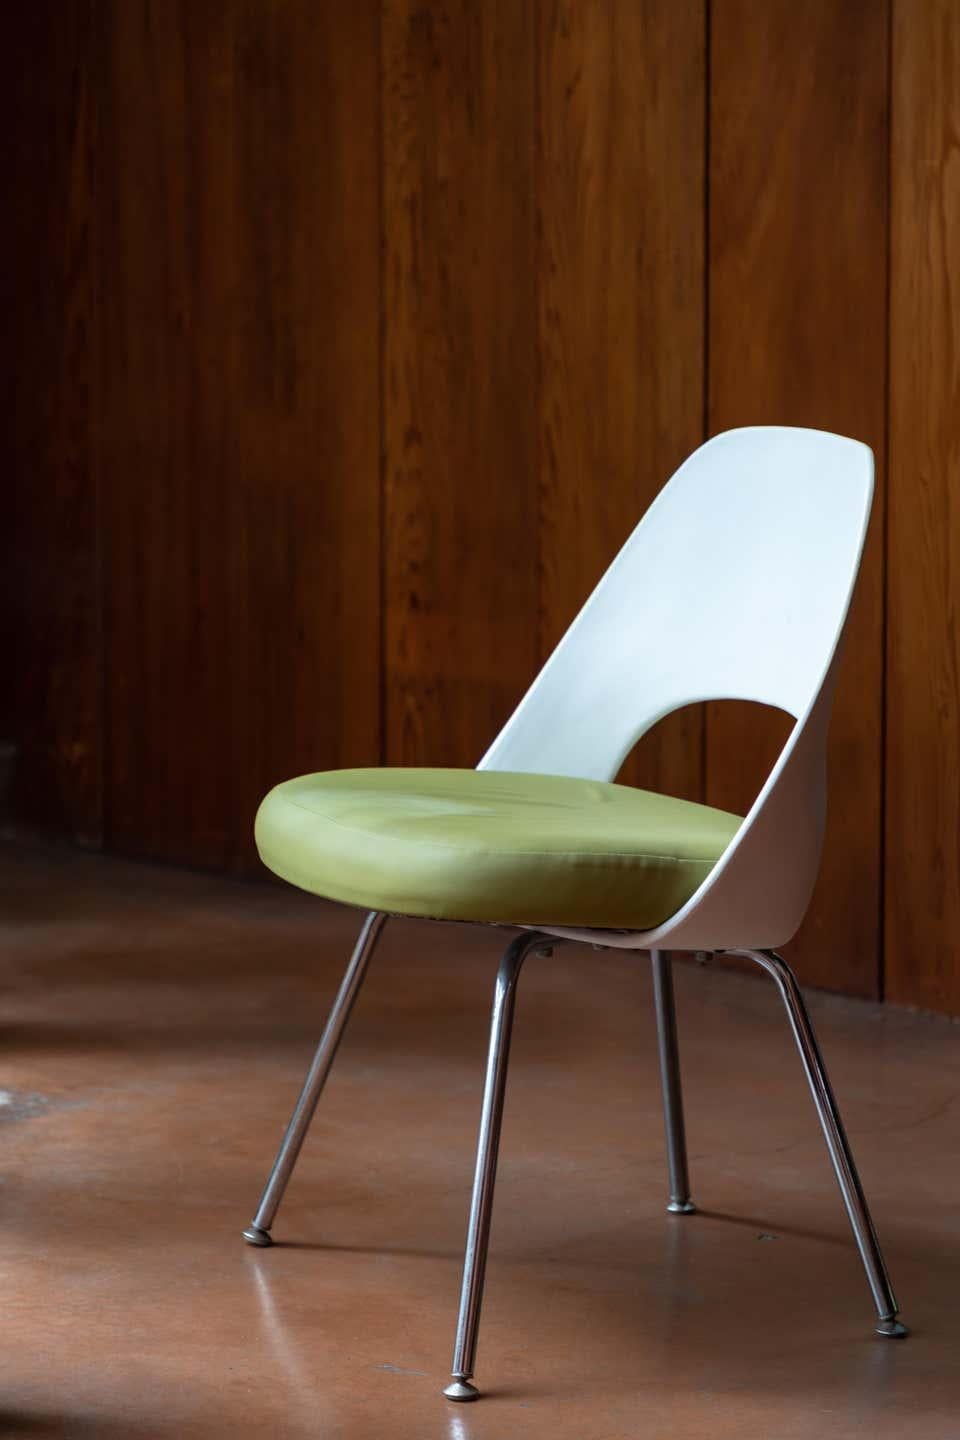 Saarinen Executive side chair with metal legs for Knoll. Originally designed in 1946, this late 1990s / early 2000s edition is executed in green and white with Knoll manufacturer's stamping in fabric on the underside of the chair. A clean and